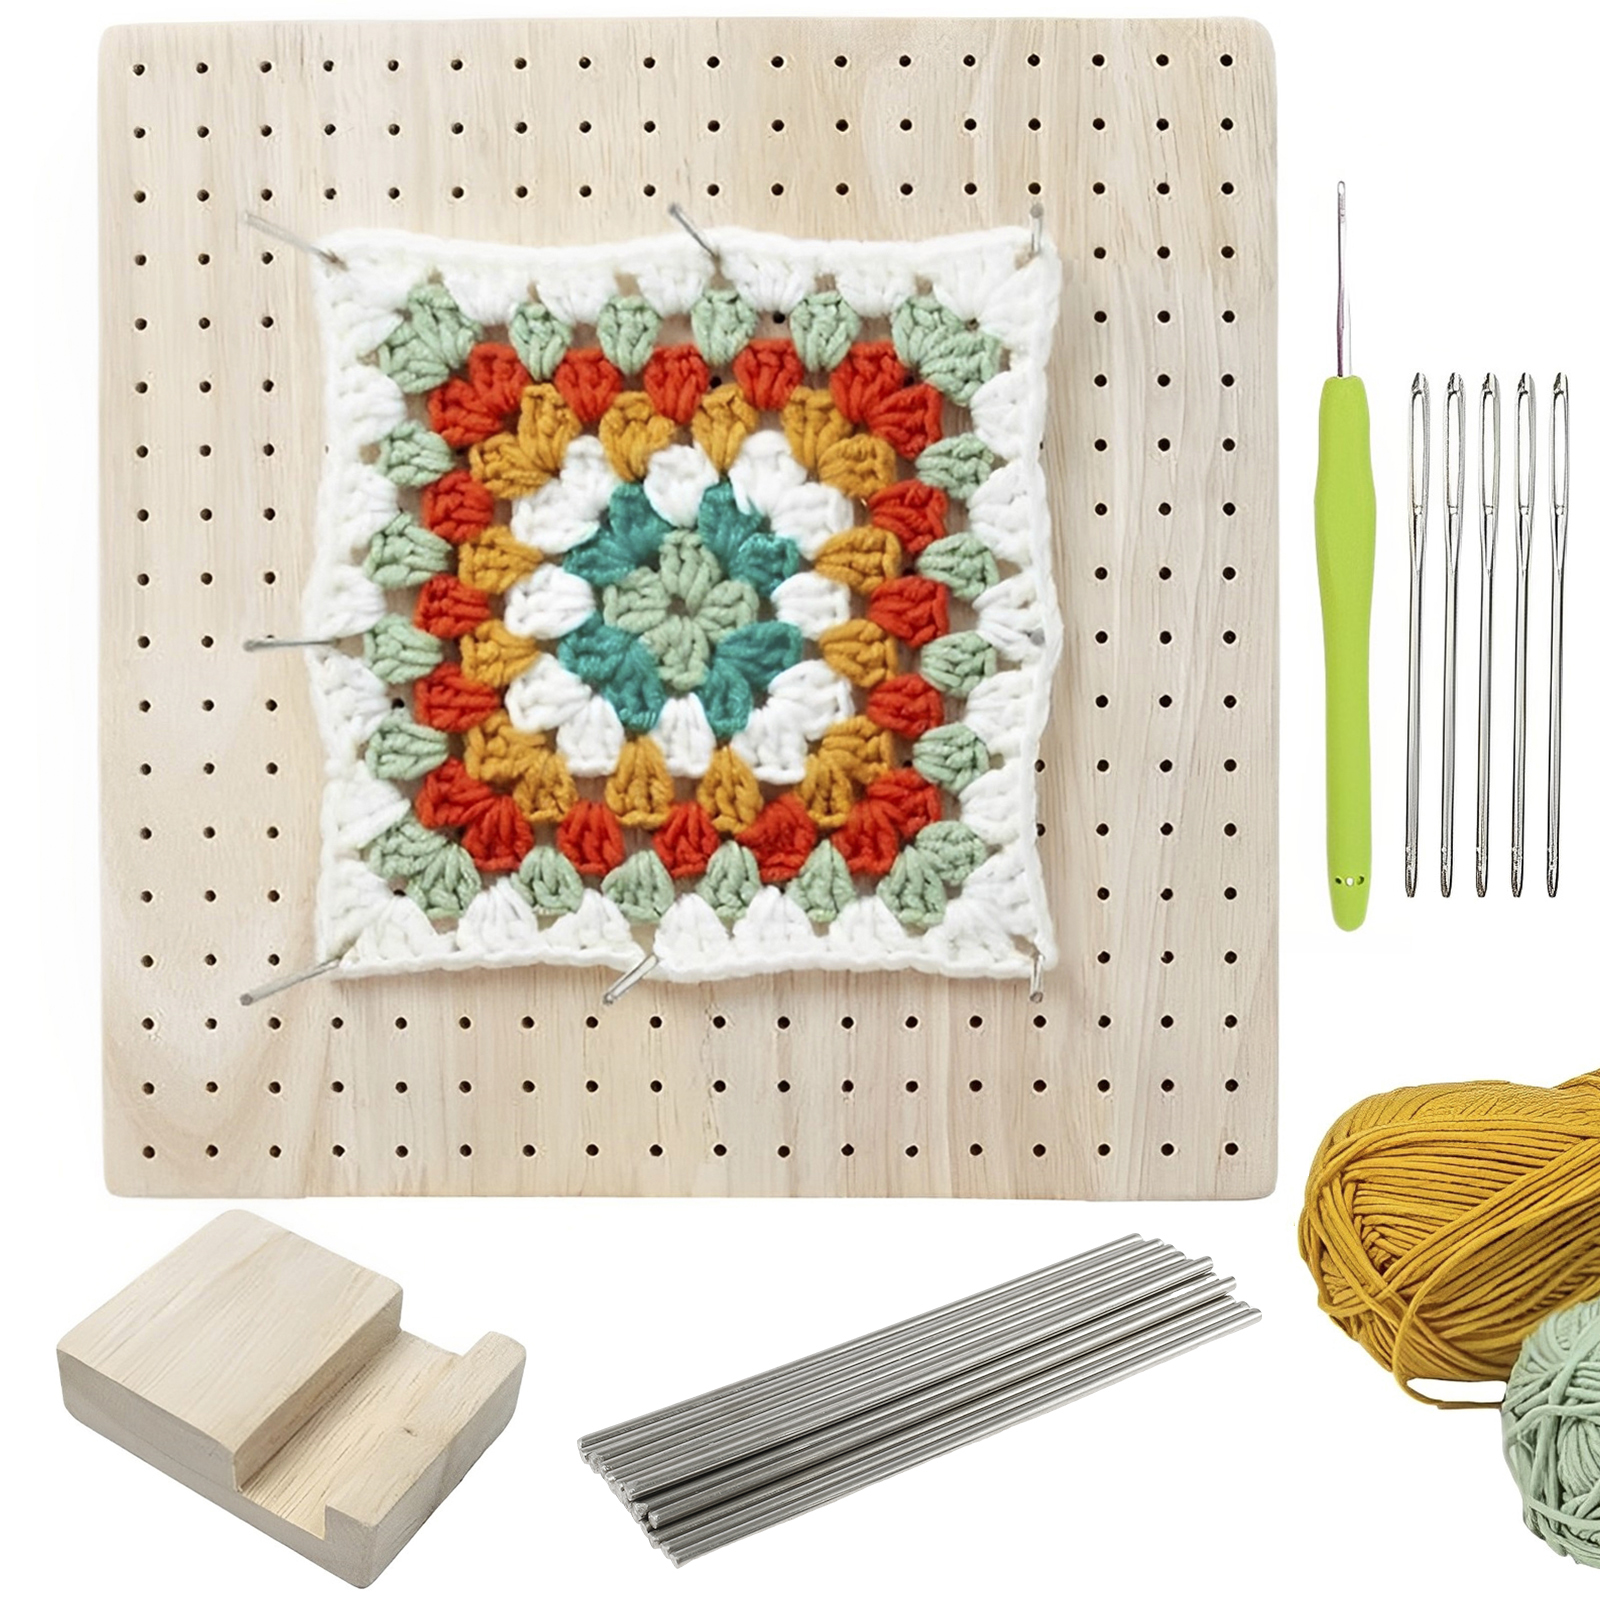  Tebery Bamboo Square Crochet Blocking Board with 20Pcs Rob Pins  for Knitting Crochet and Granny, Handcrafted Knitting Blocking Mat with 12  Colors Yarn and Knitting Base,7.8 x 7.8 inches